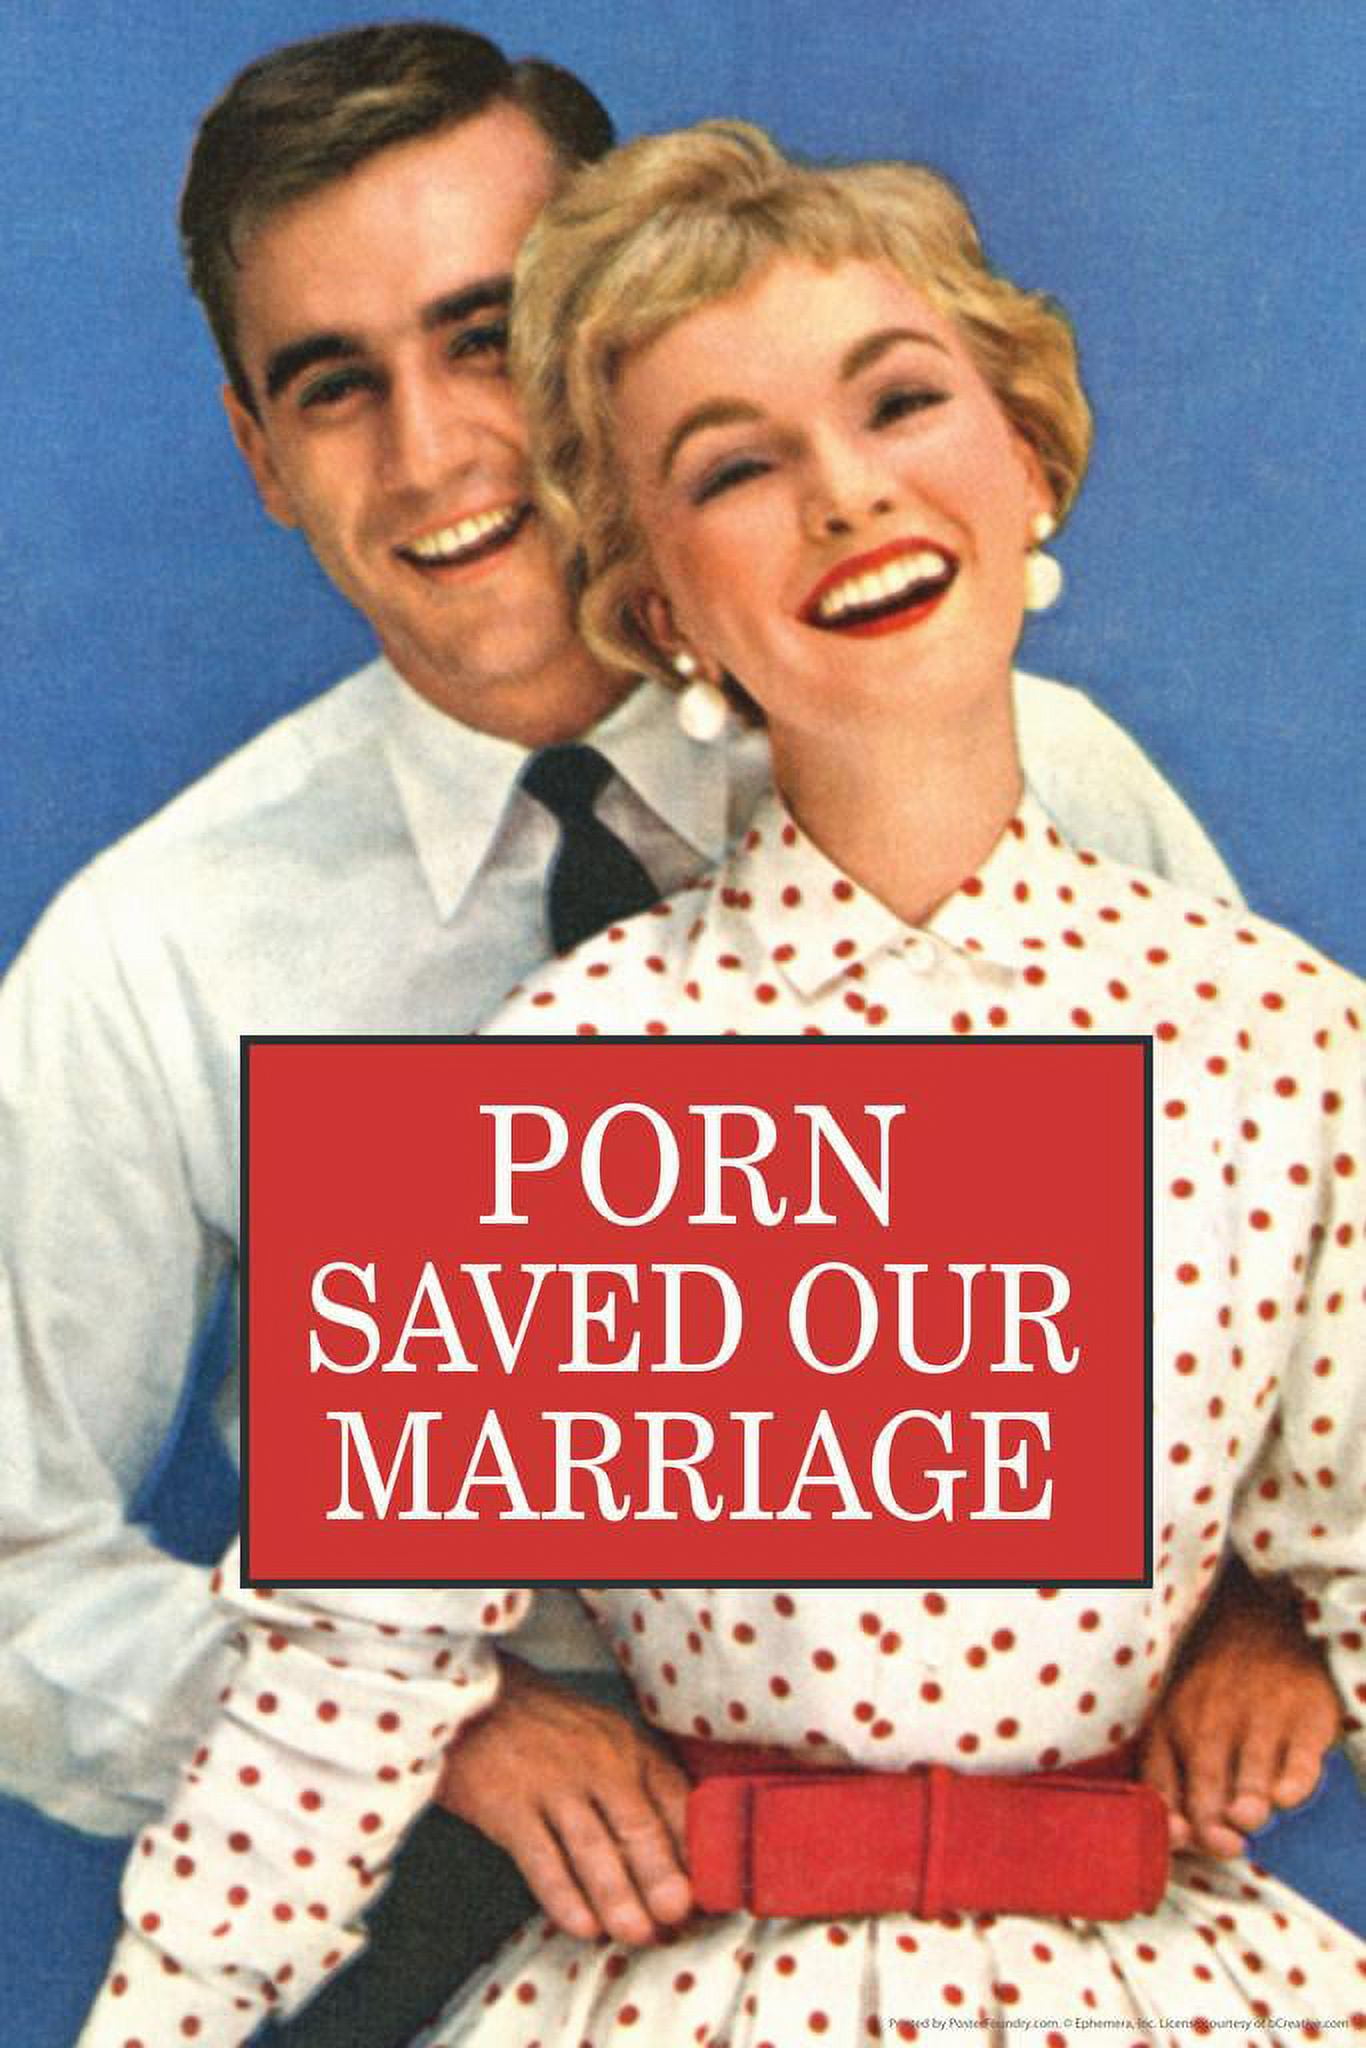 Saxved - Laminated Porn Saved Our Marriage Humor Poster Dry Erase Sign 16x24 -  Walmart.com